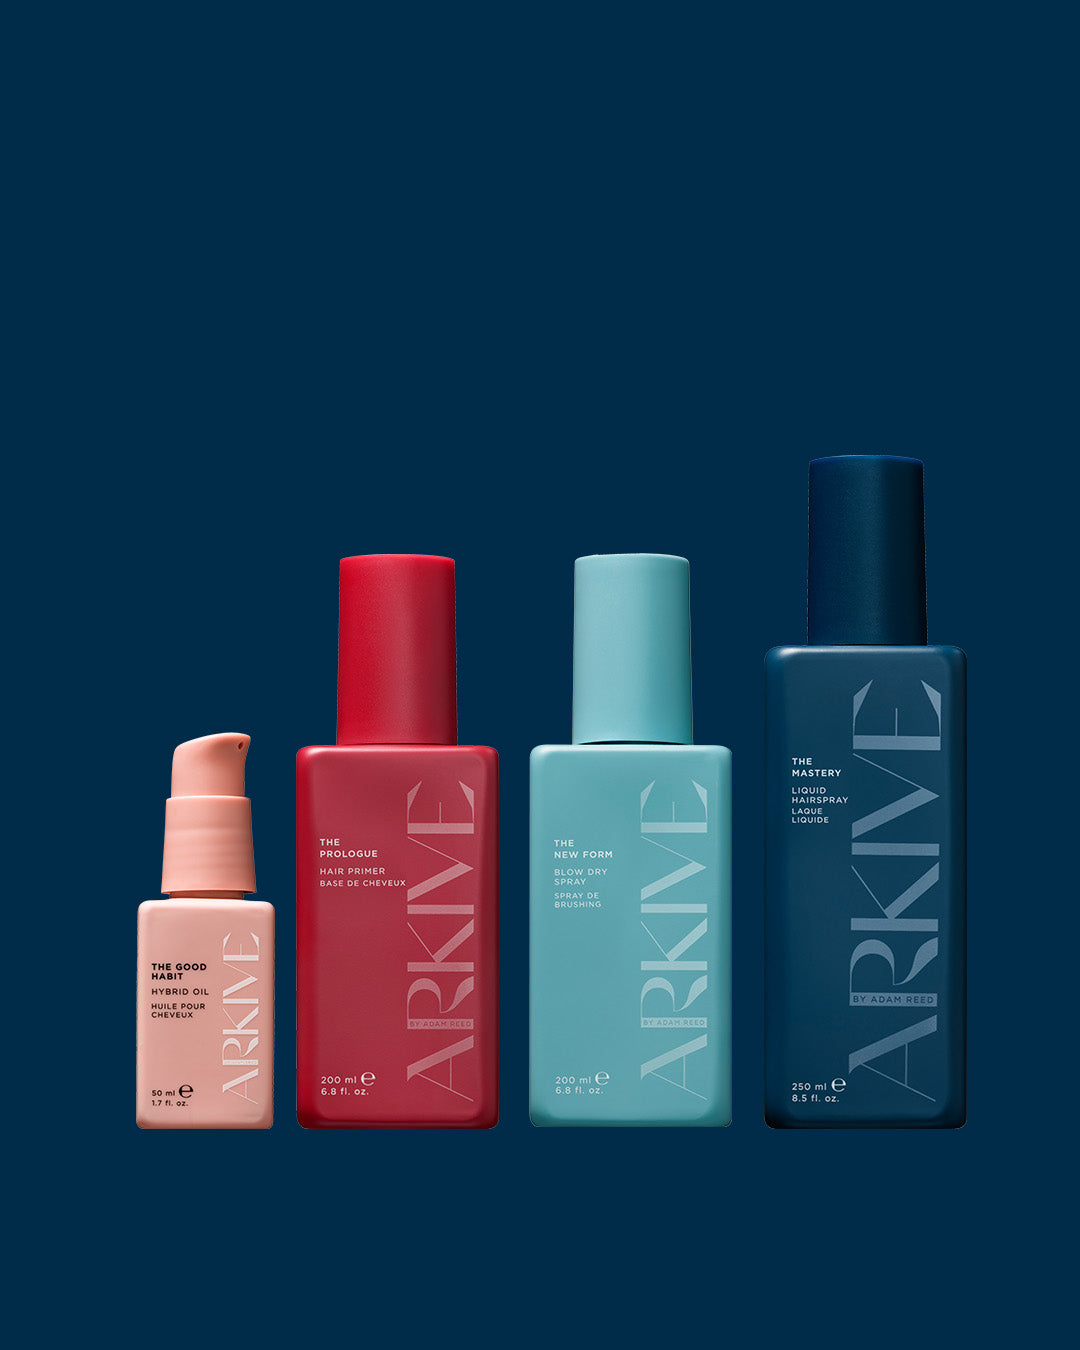 Arkive's Strong on Styling Set, featuring The Good Habit Hybrid Oil, The New Form Blow Dry Hairspray, The Prologue Primer and The Mastery Hairspray on a navy background